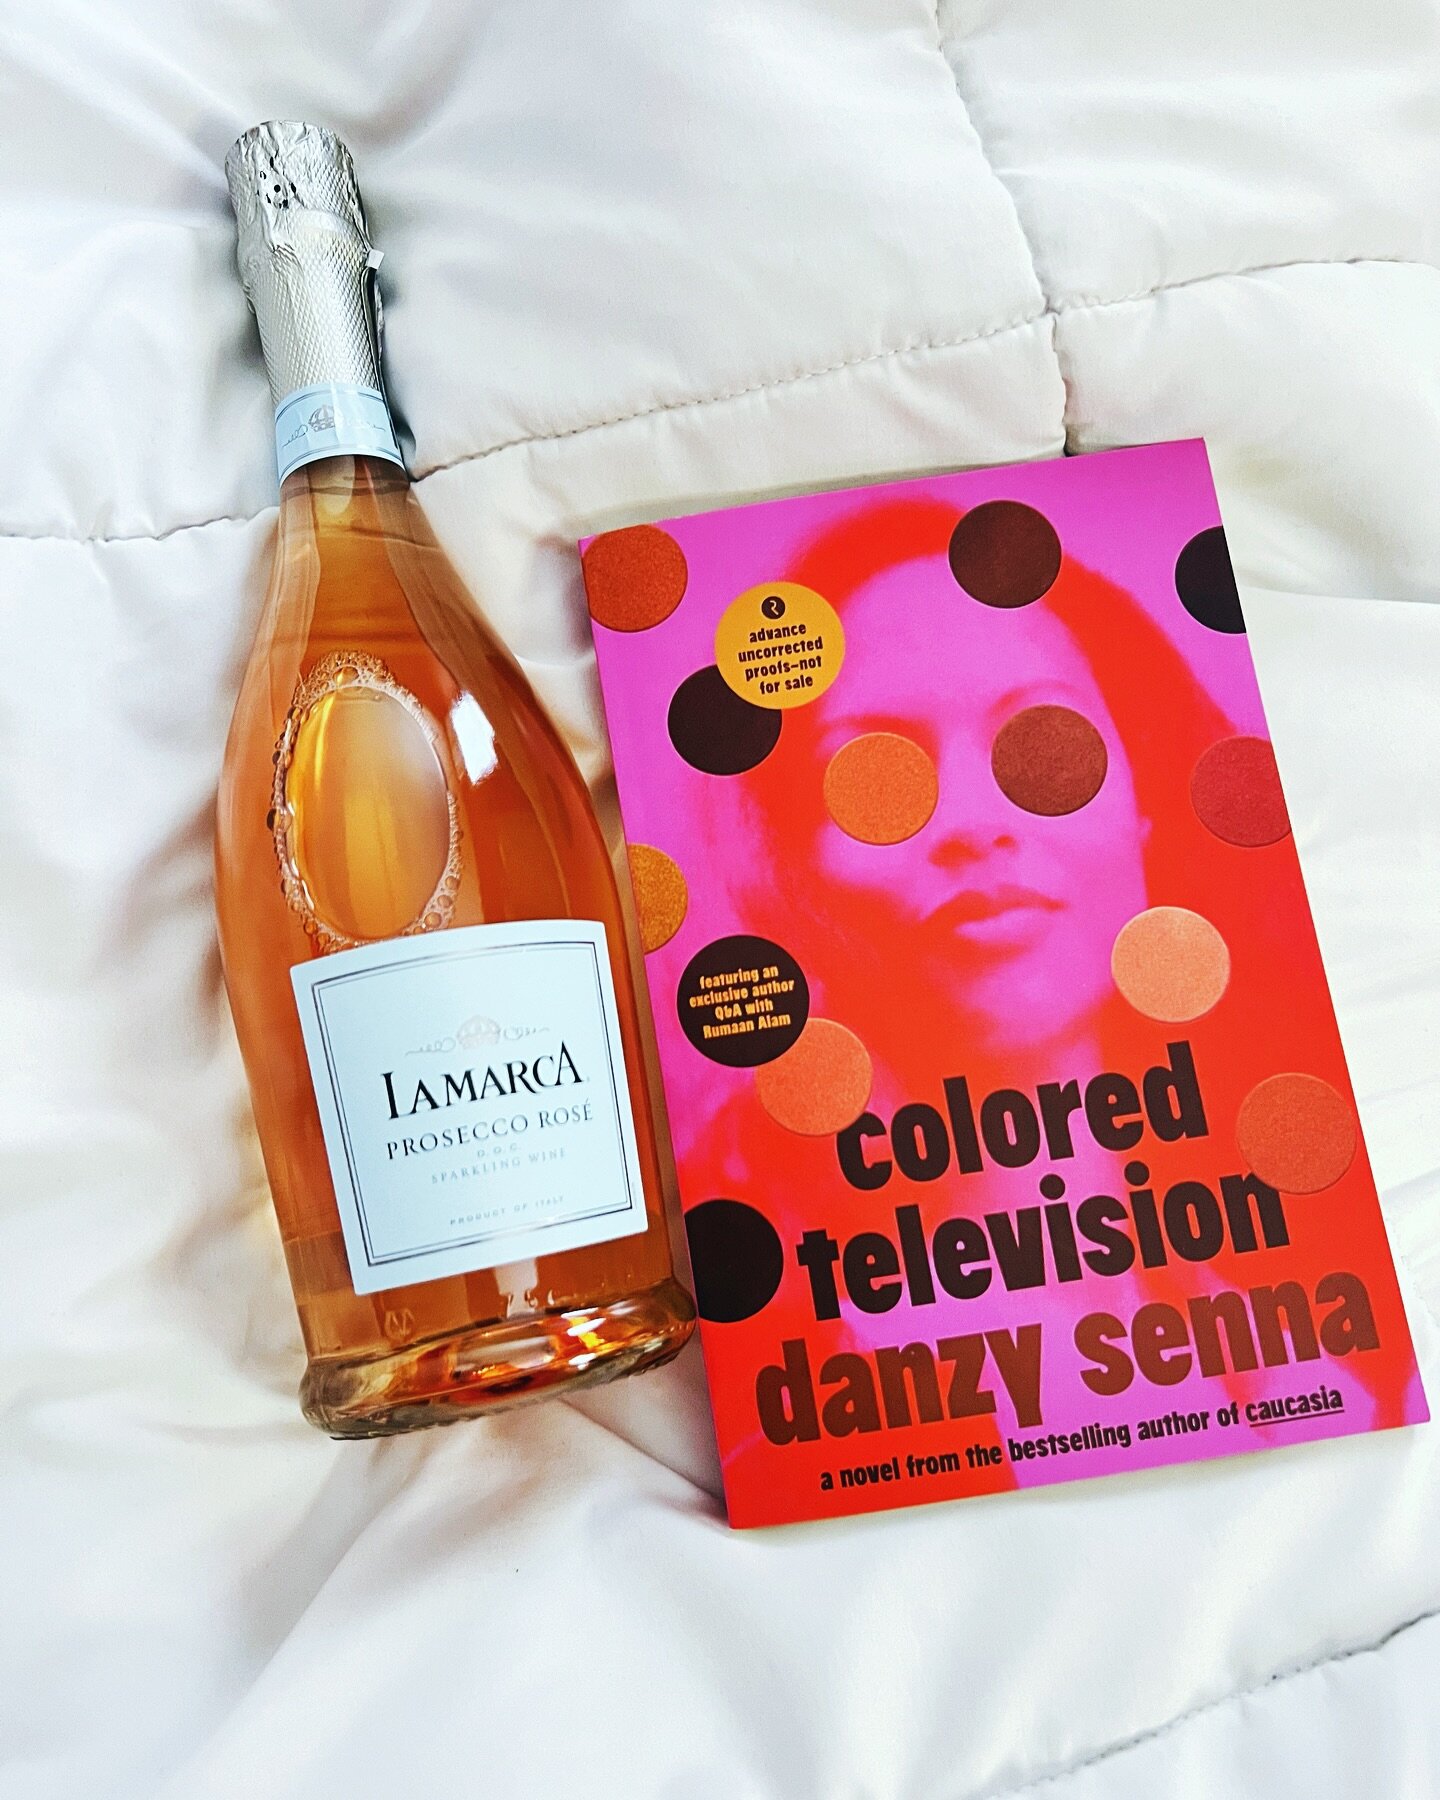 #WeekendVibes 🥂📖 🌸 Ros&eacute; Bubbles &amp; one of my most anticipated reads of the year!  Thank you Team @riverheadbooks for the gifted copy of #ColoredTelevision by Danzy Senna. I read Danzy Senna&rsquo;s debut novel, Caucasia, during the pande